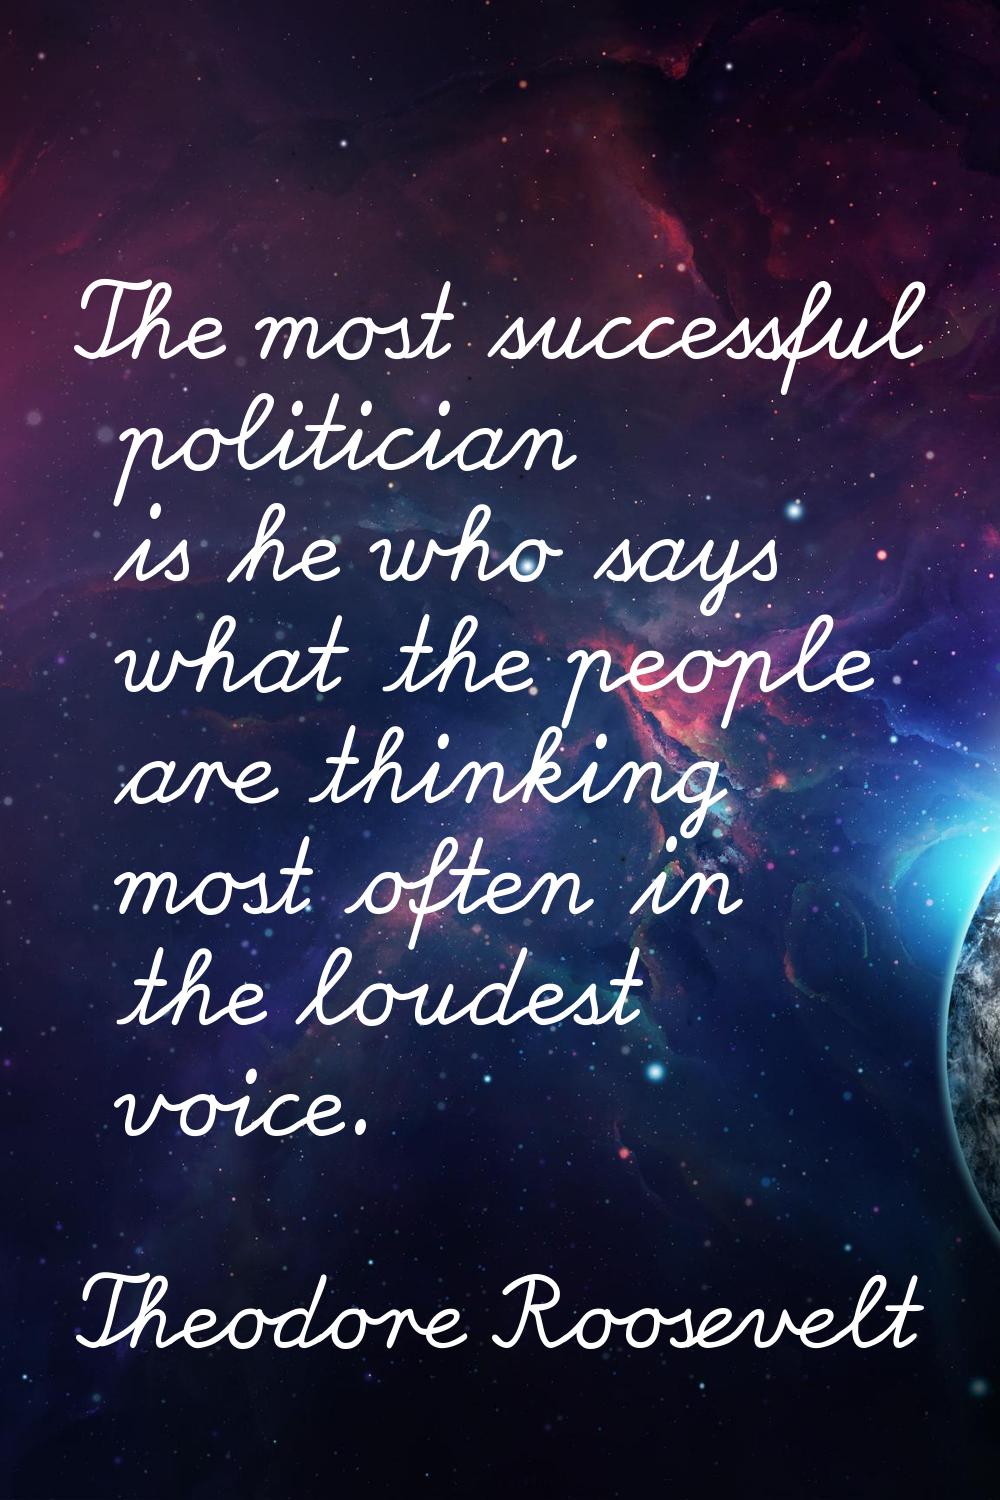 The most successful politician is he who says what the people are thinking most often in the loudes